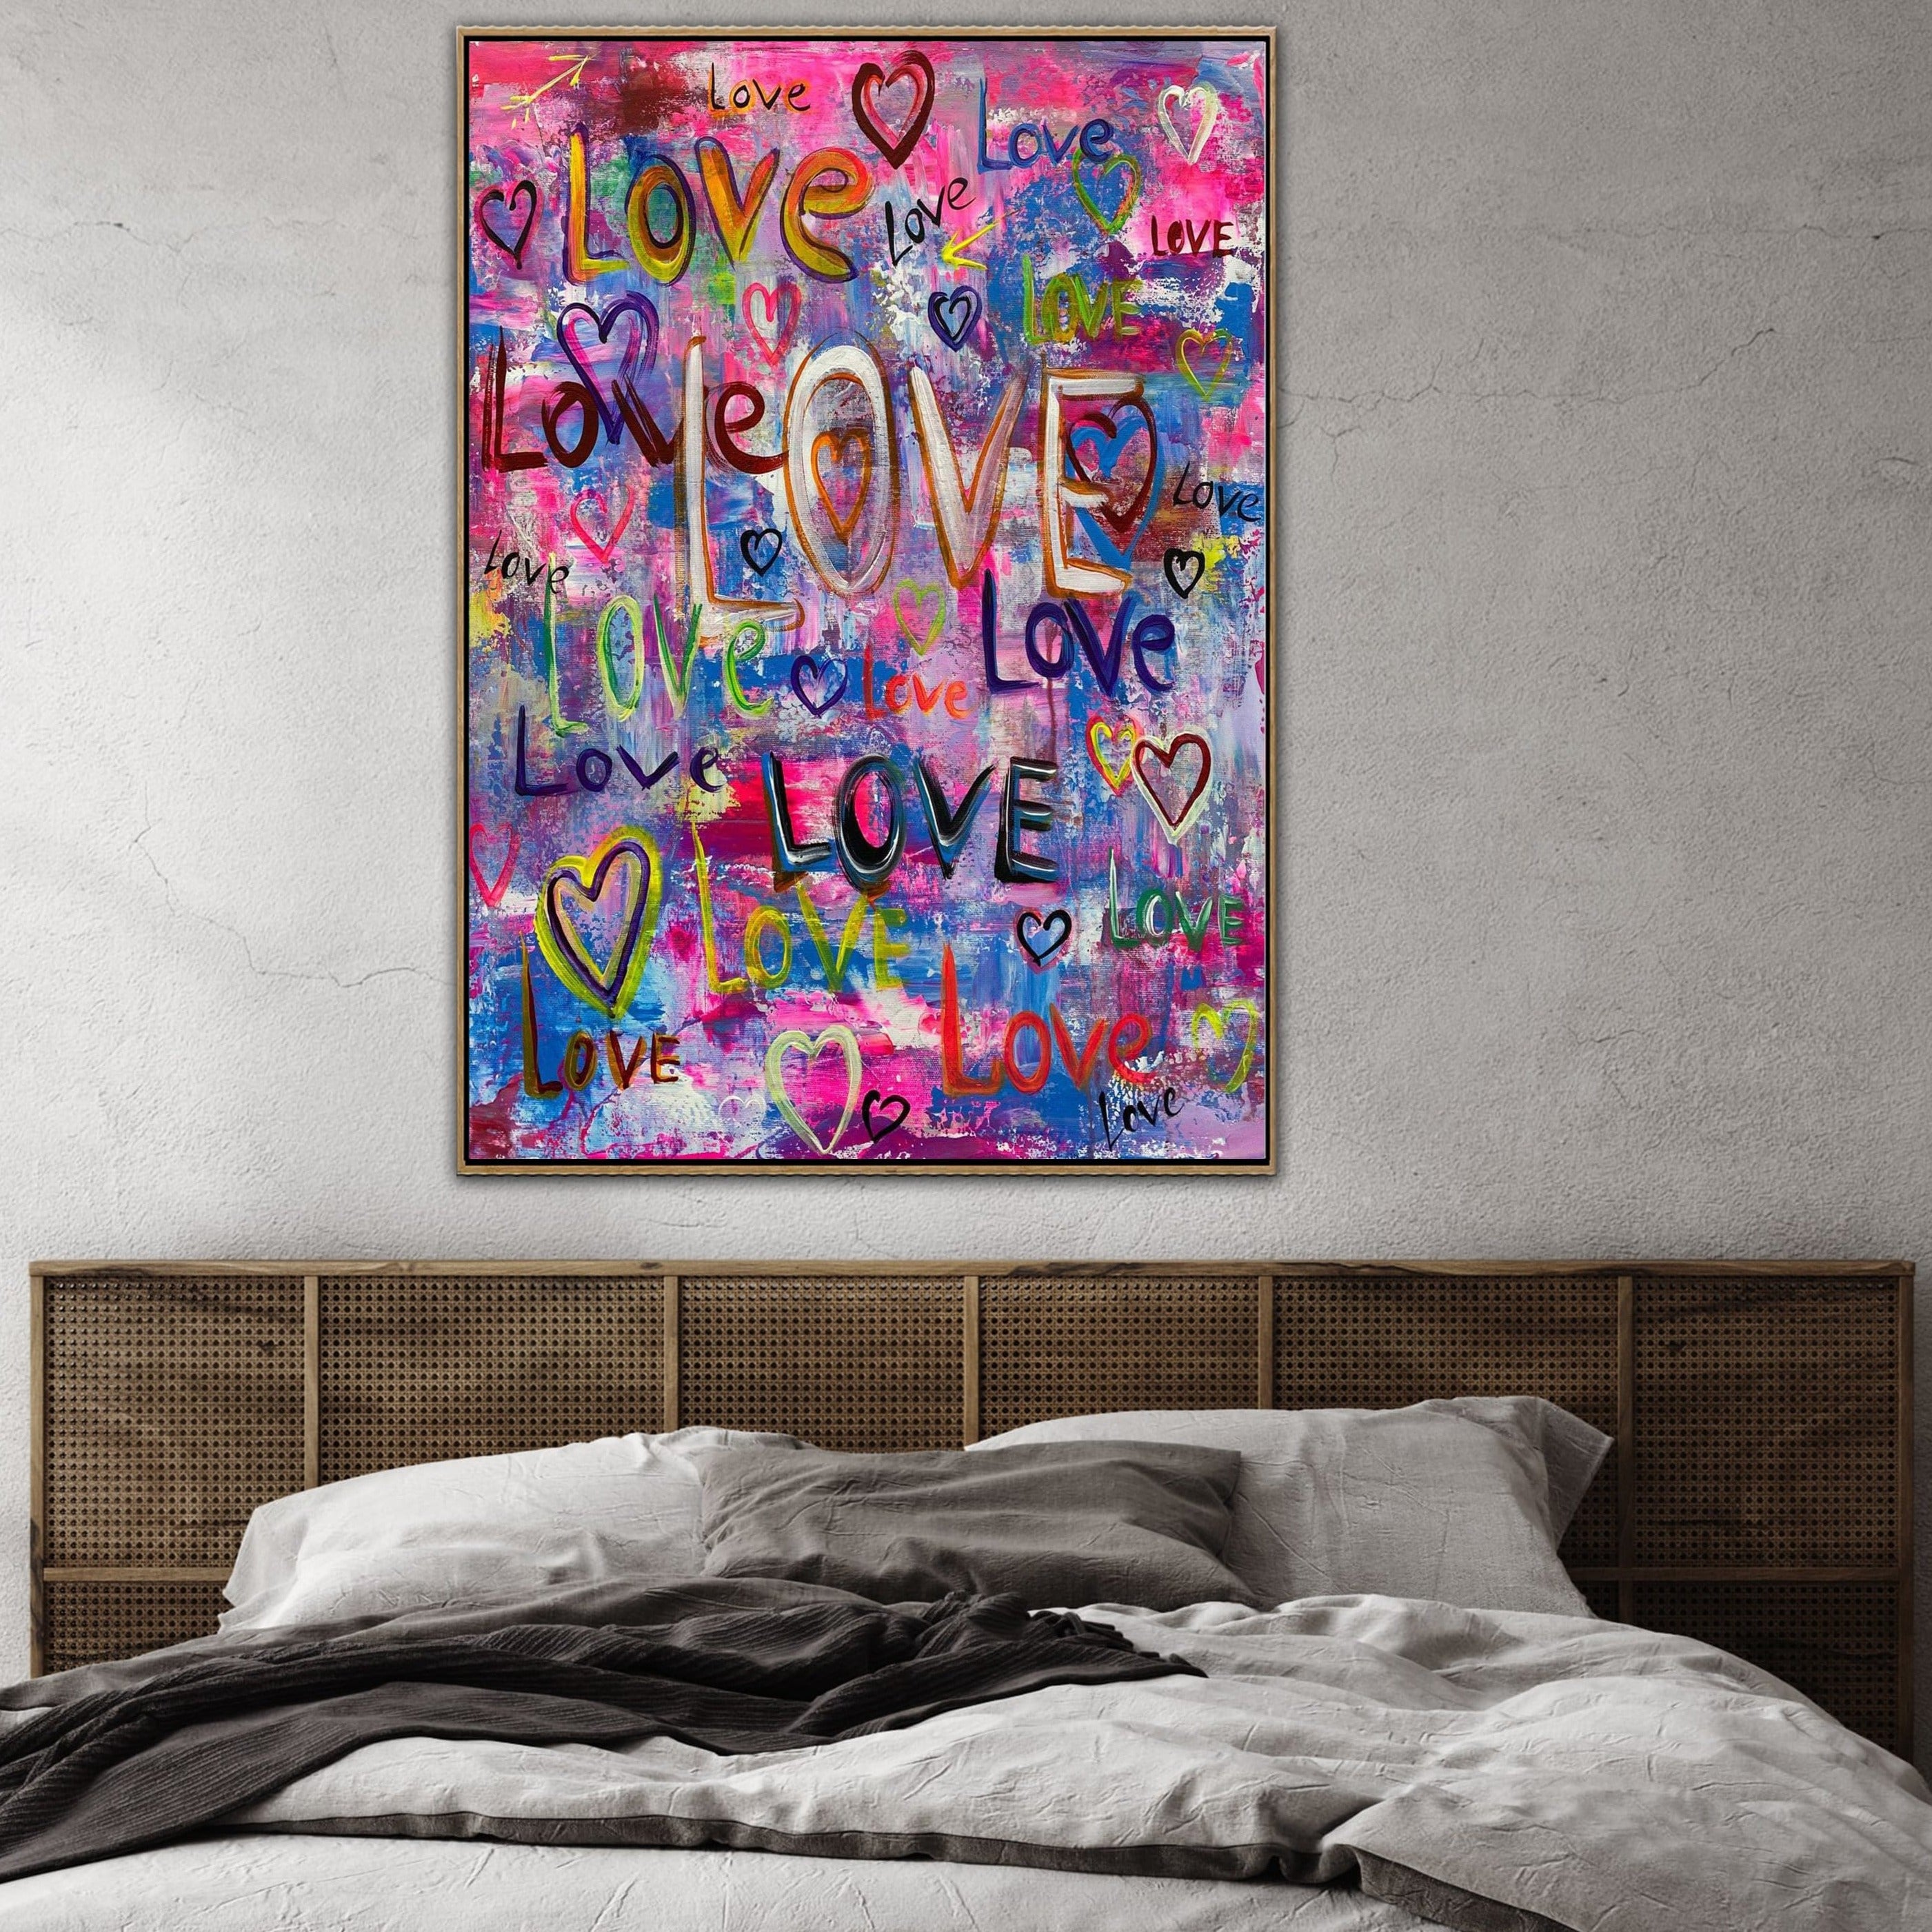 LOVE ART from $310